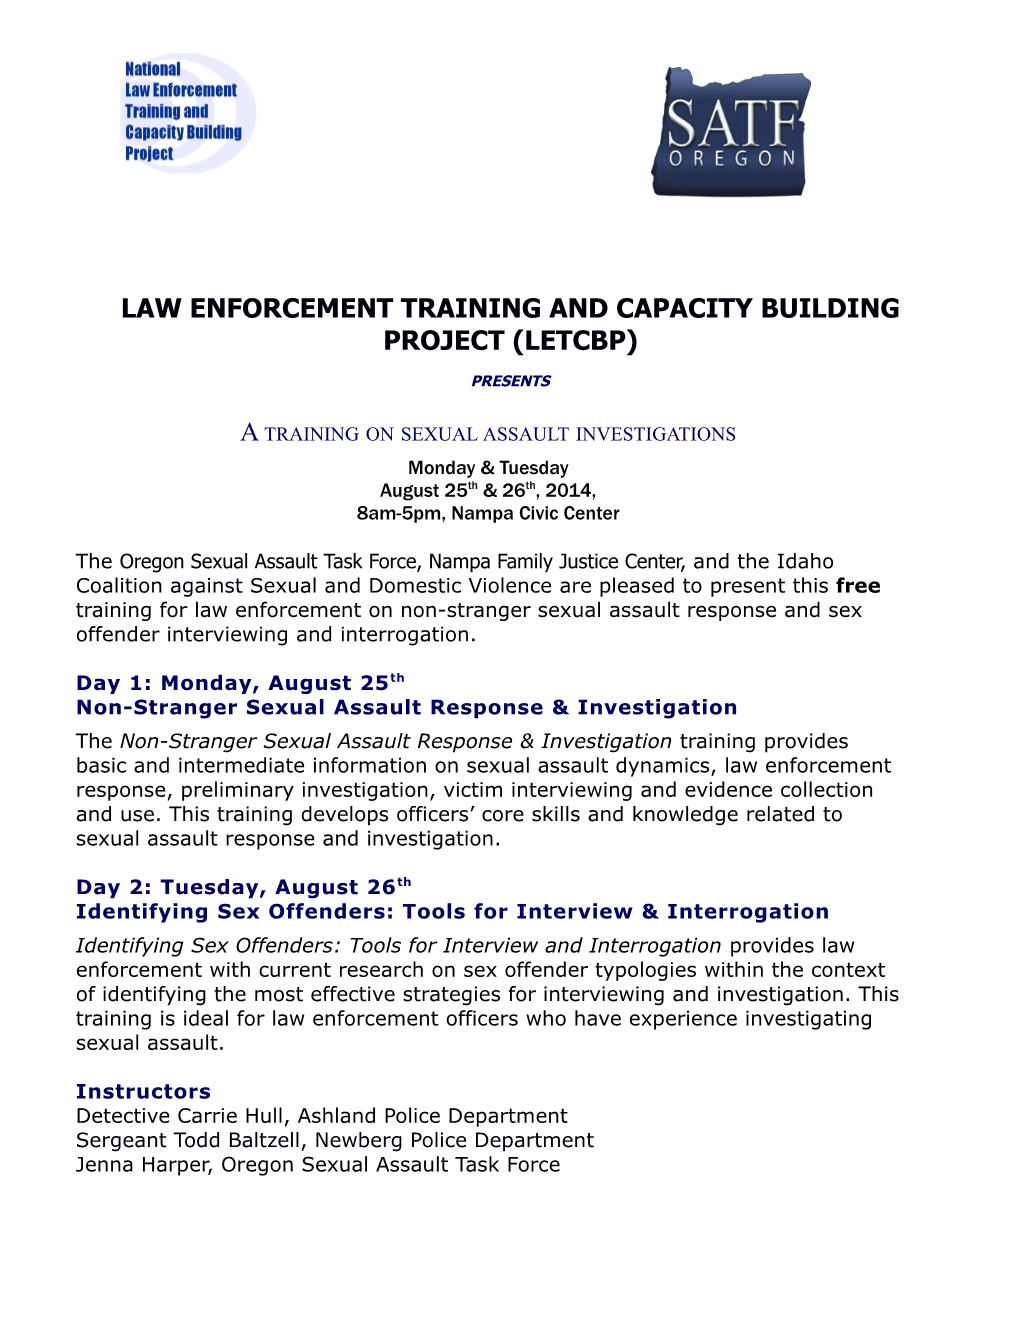 Law Enforcement Training and Capacity Building Project (Letcbp)